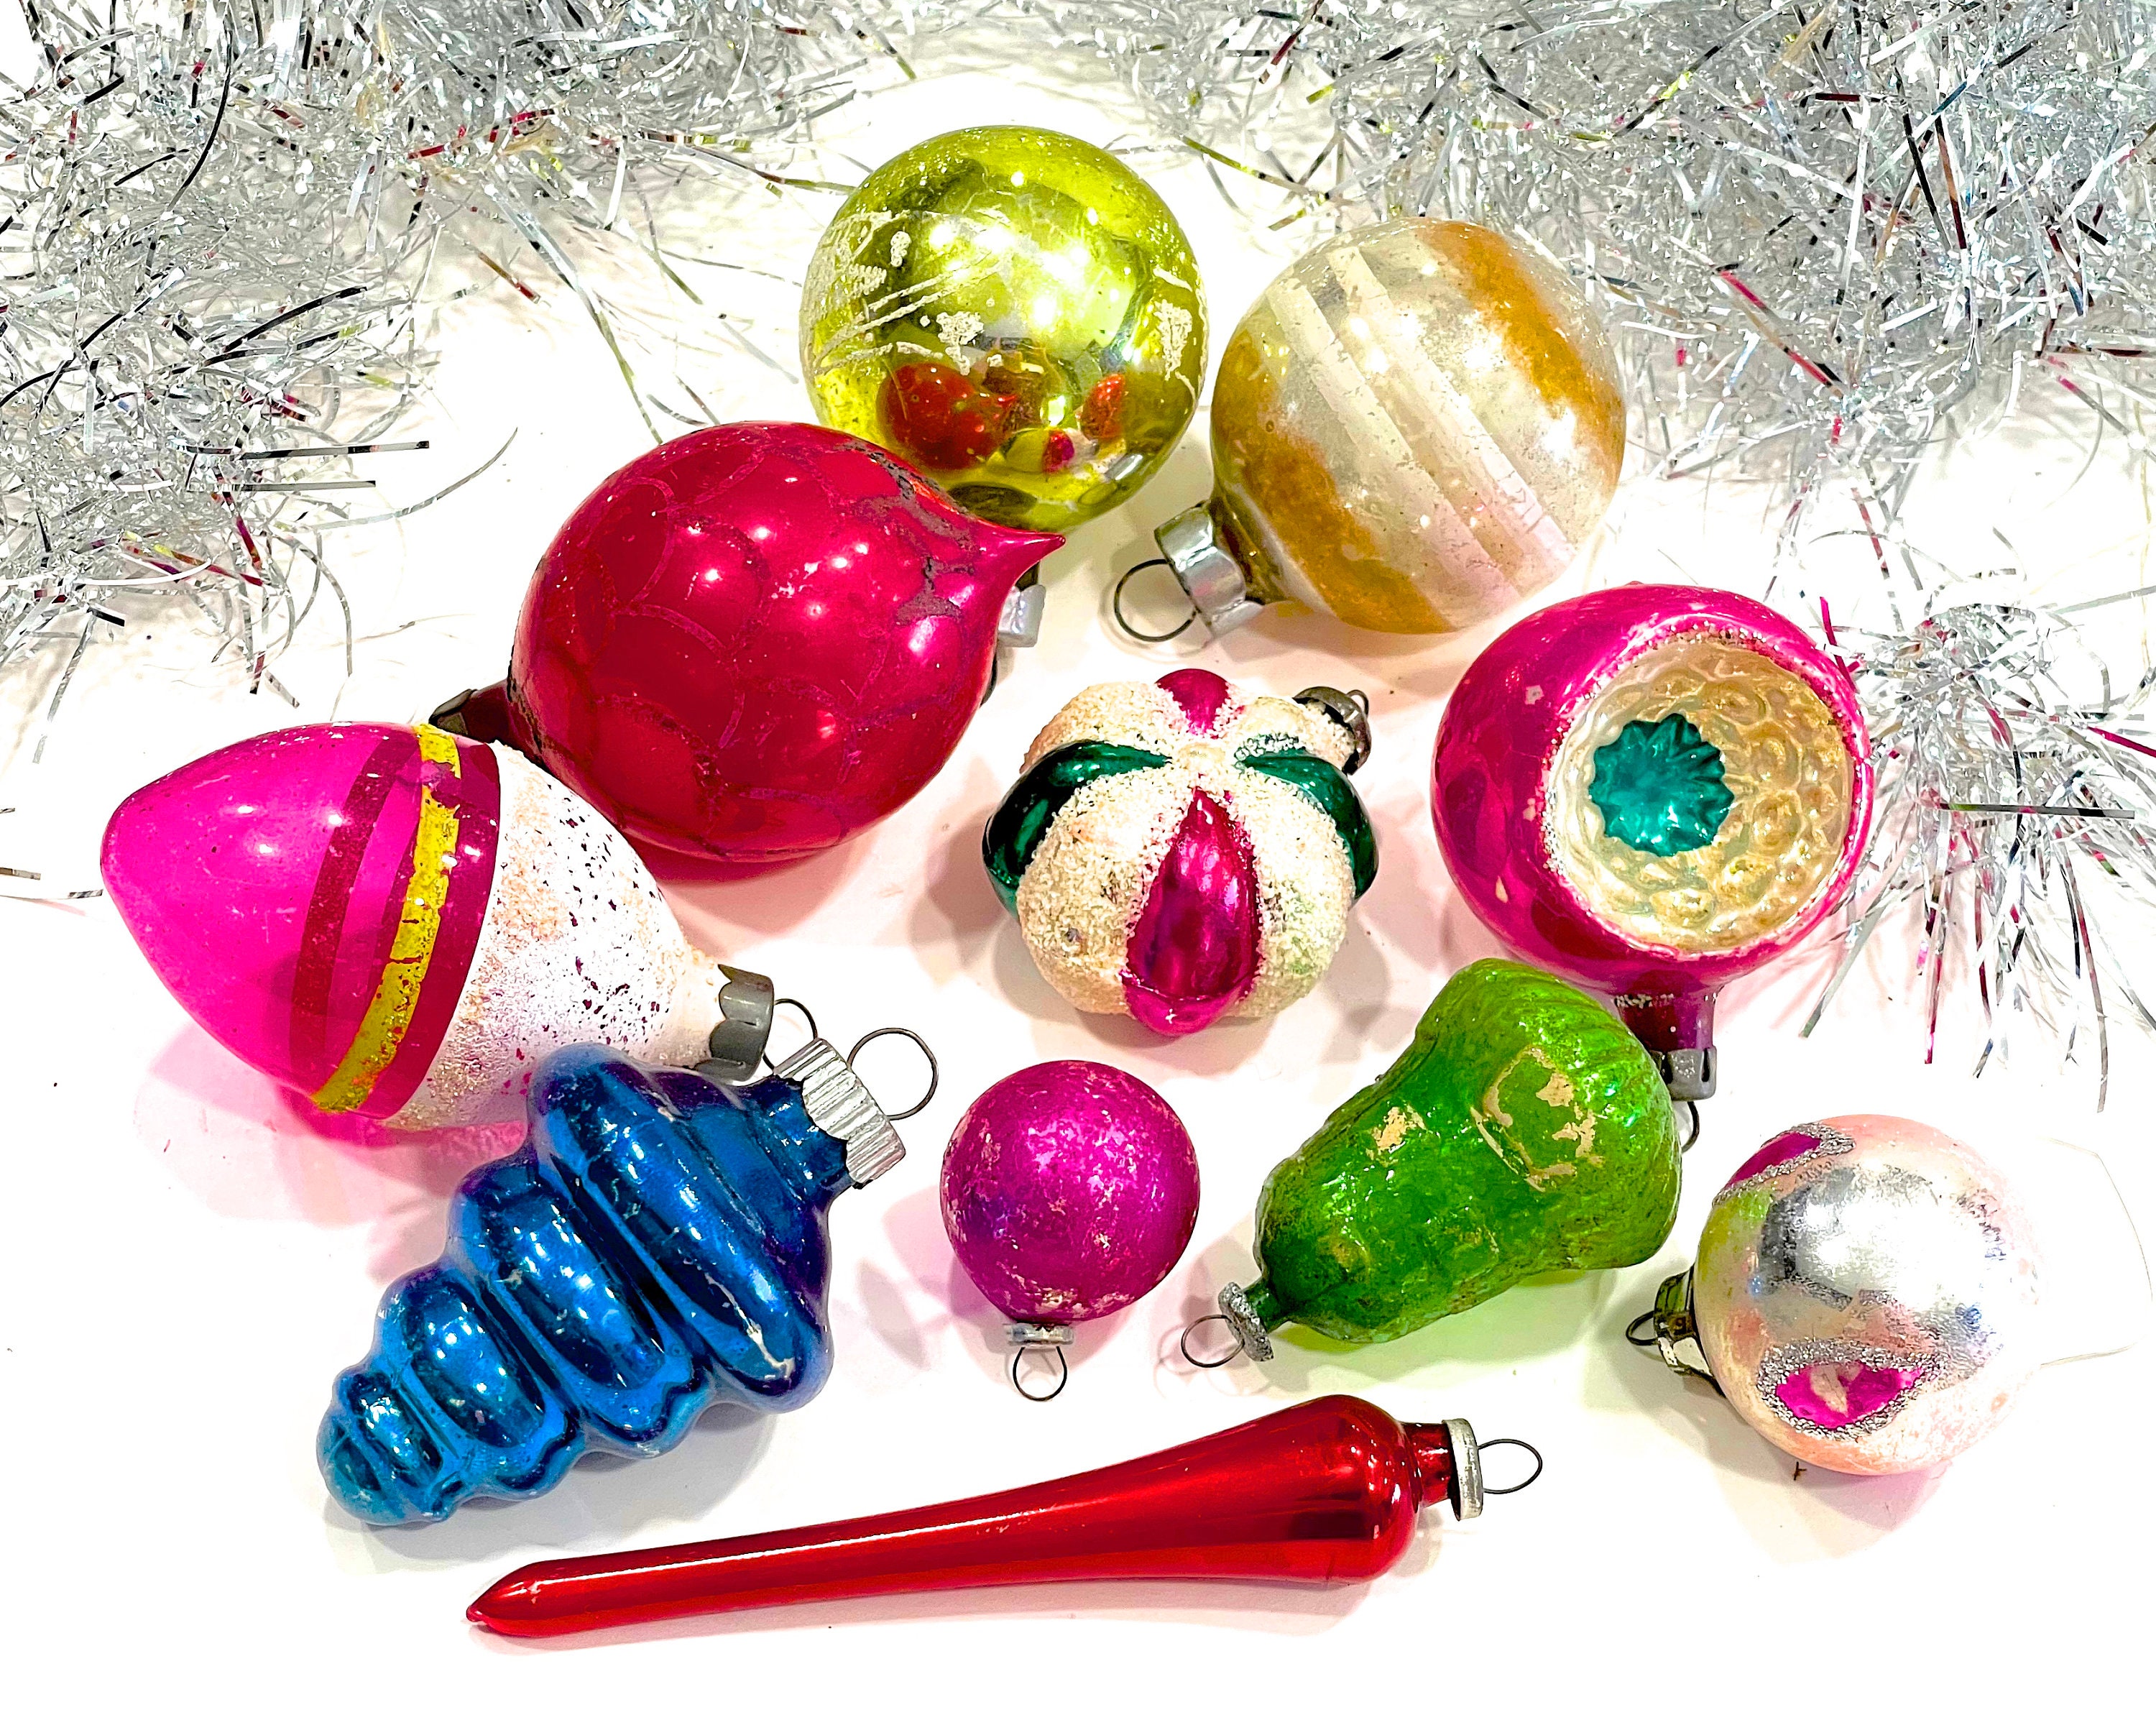 VINTAGE: 11 Old Blown Glass Christmas Ornaments Holiday Old